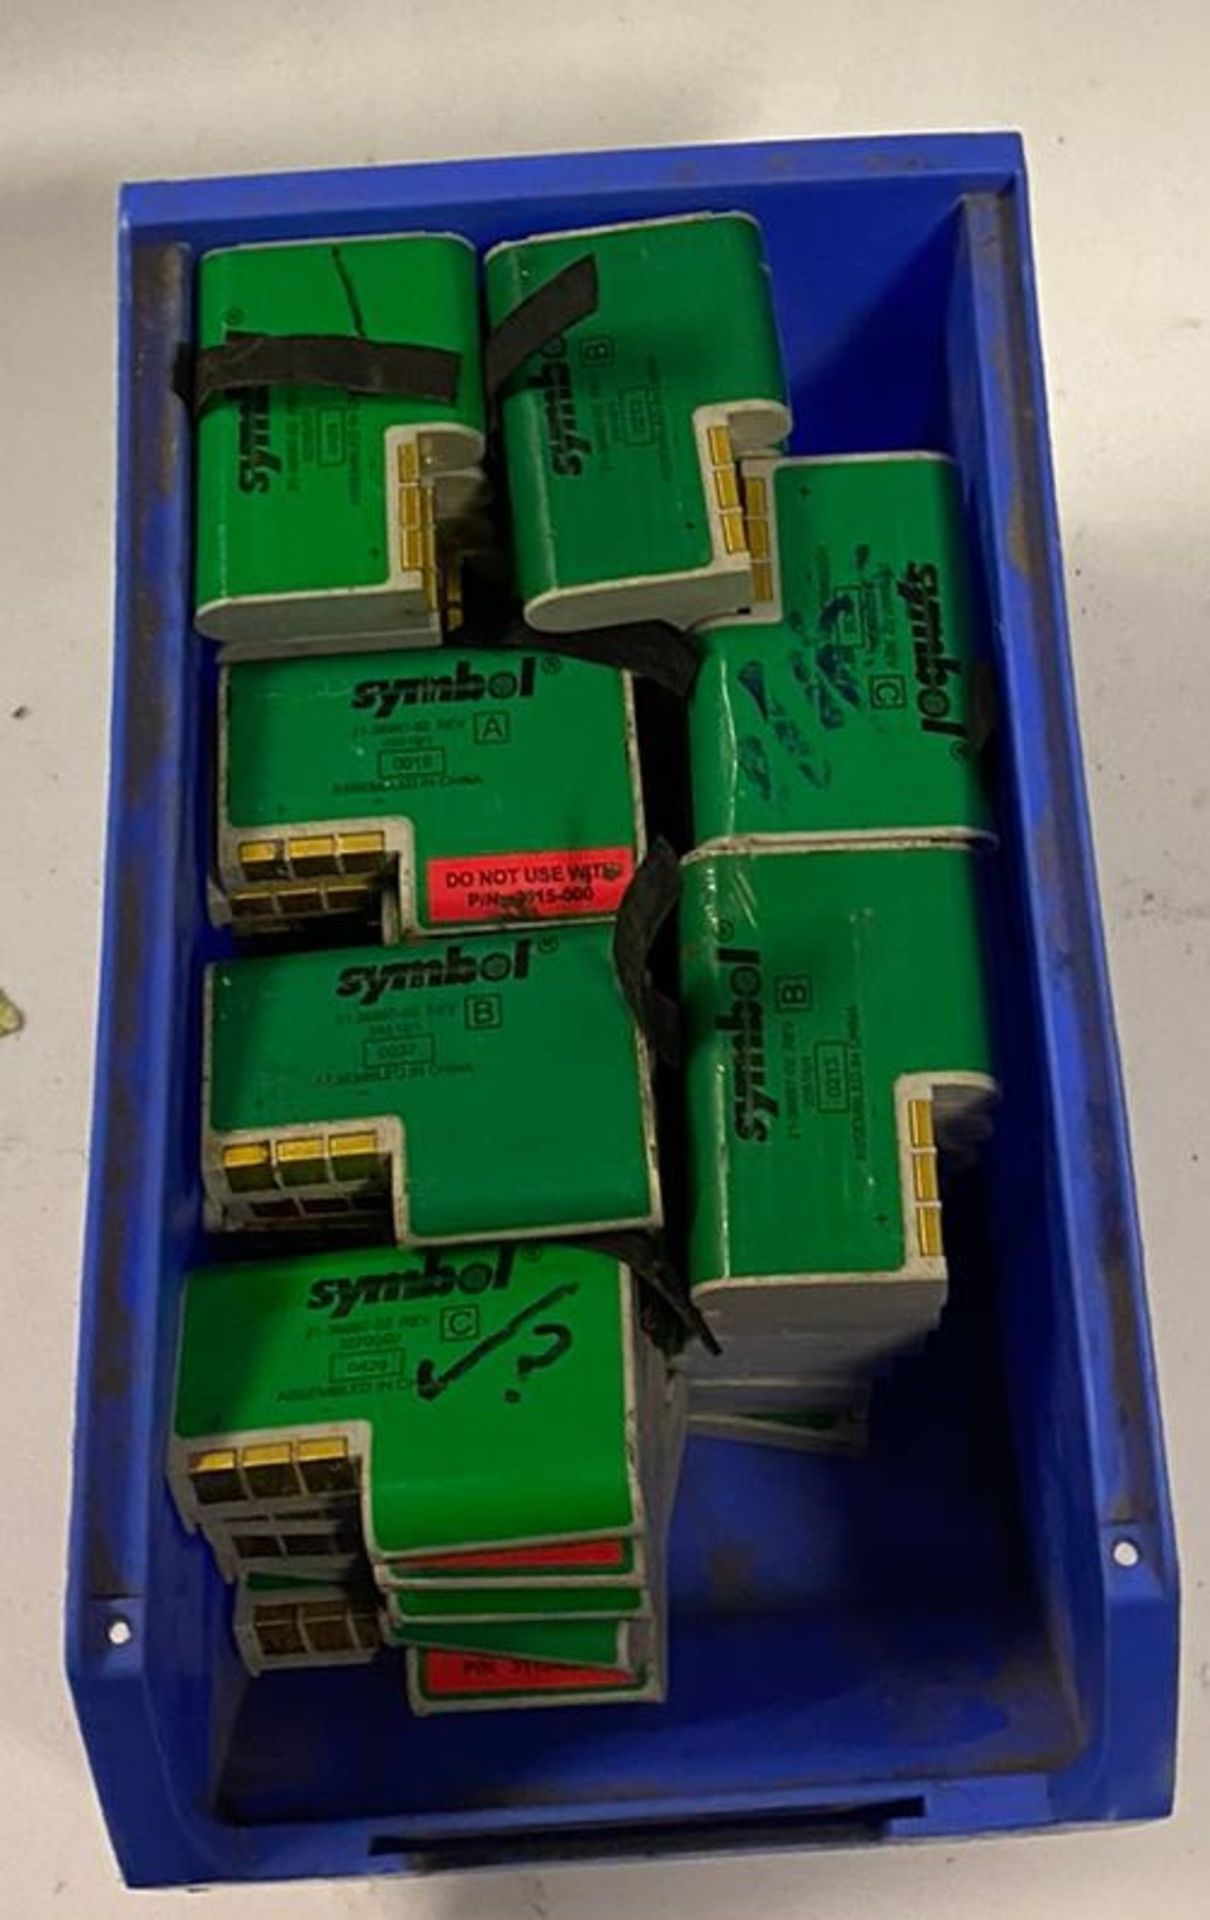 5 x Symbol 21-36897-02 Rechargeable 6.0V Batteries - Used Condition - Location: Altrincham WA14 - - Image 4 of 5